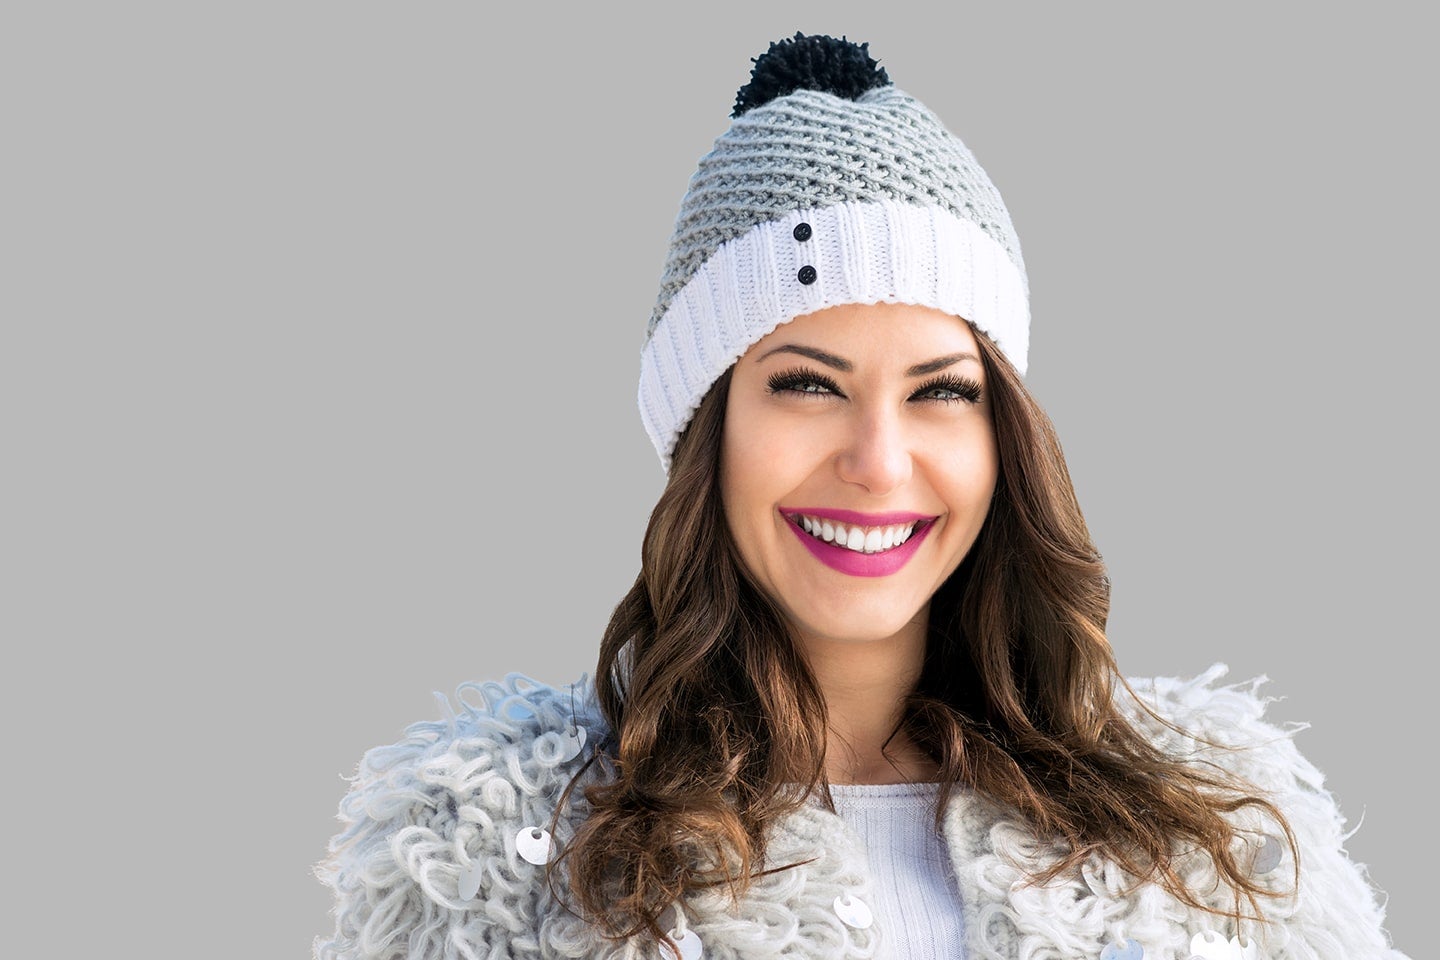 A woman smiles while wearing a winter hat and holiday makeup with a red lip and lashes